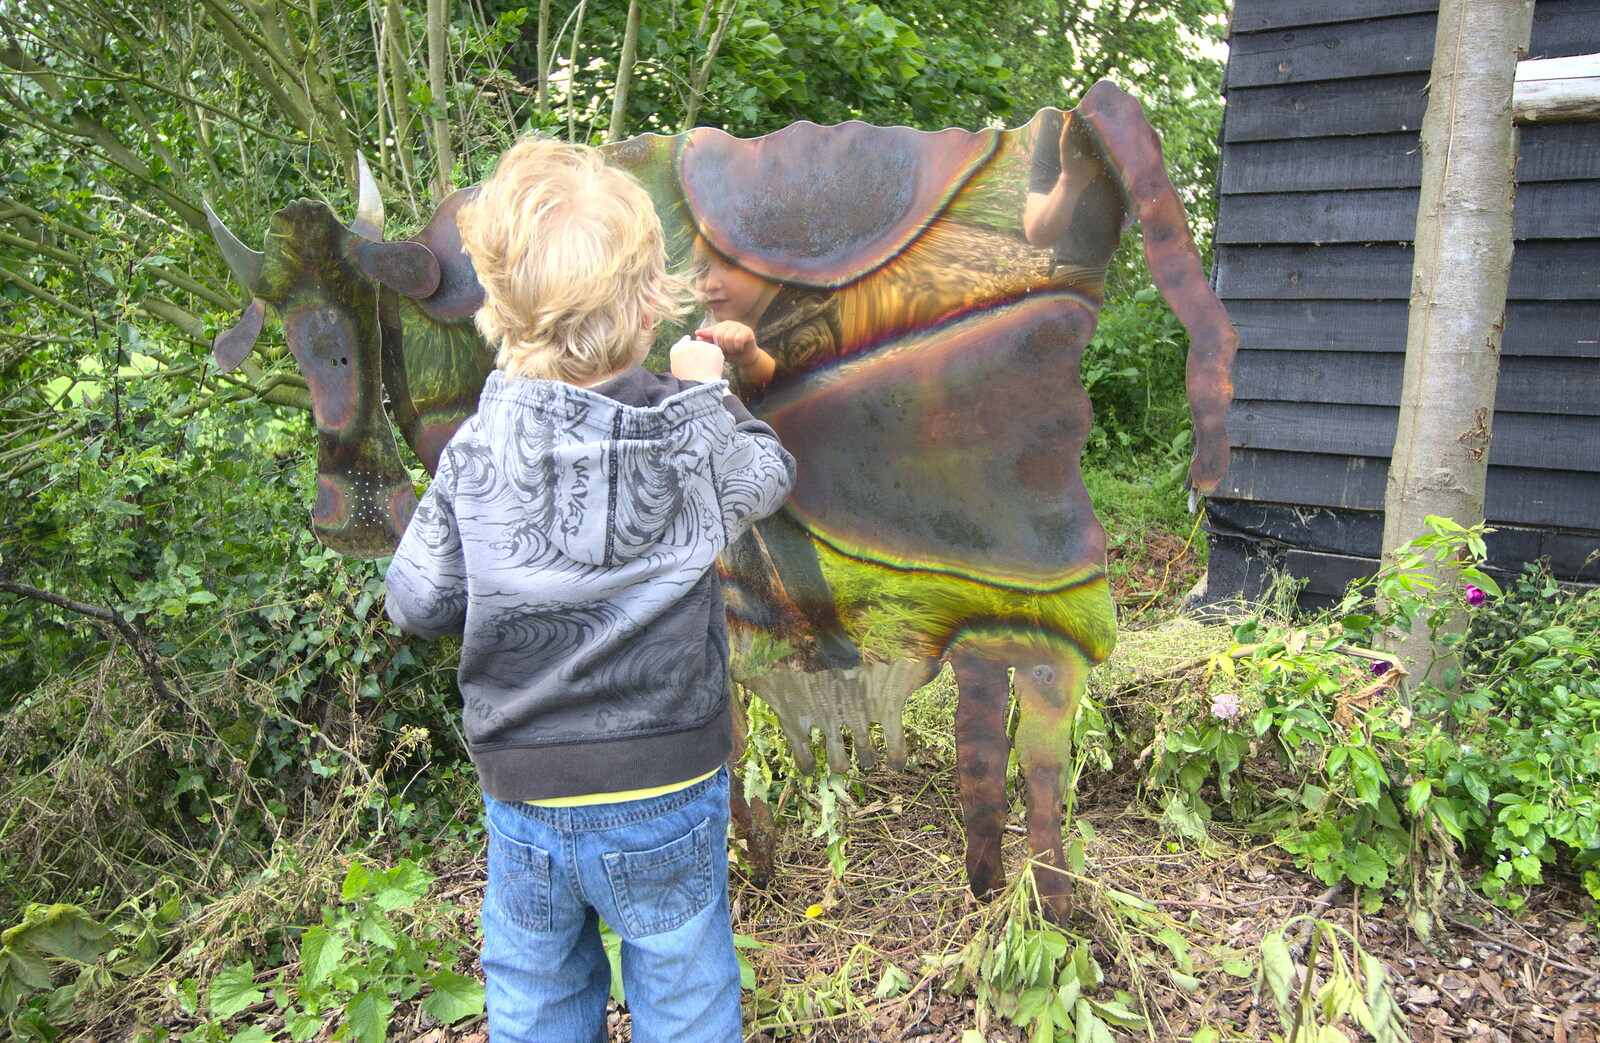 Fred pokes at the cow sculpture from Grandad's Gaff and Music in the Park, Diss, Norfolk - 16th June 2012